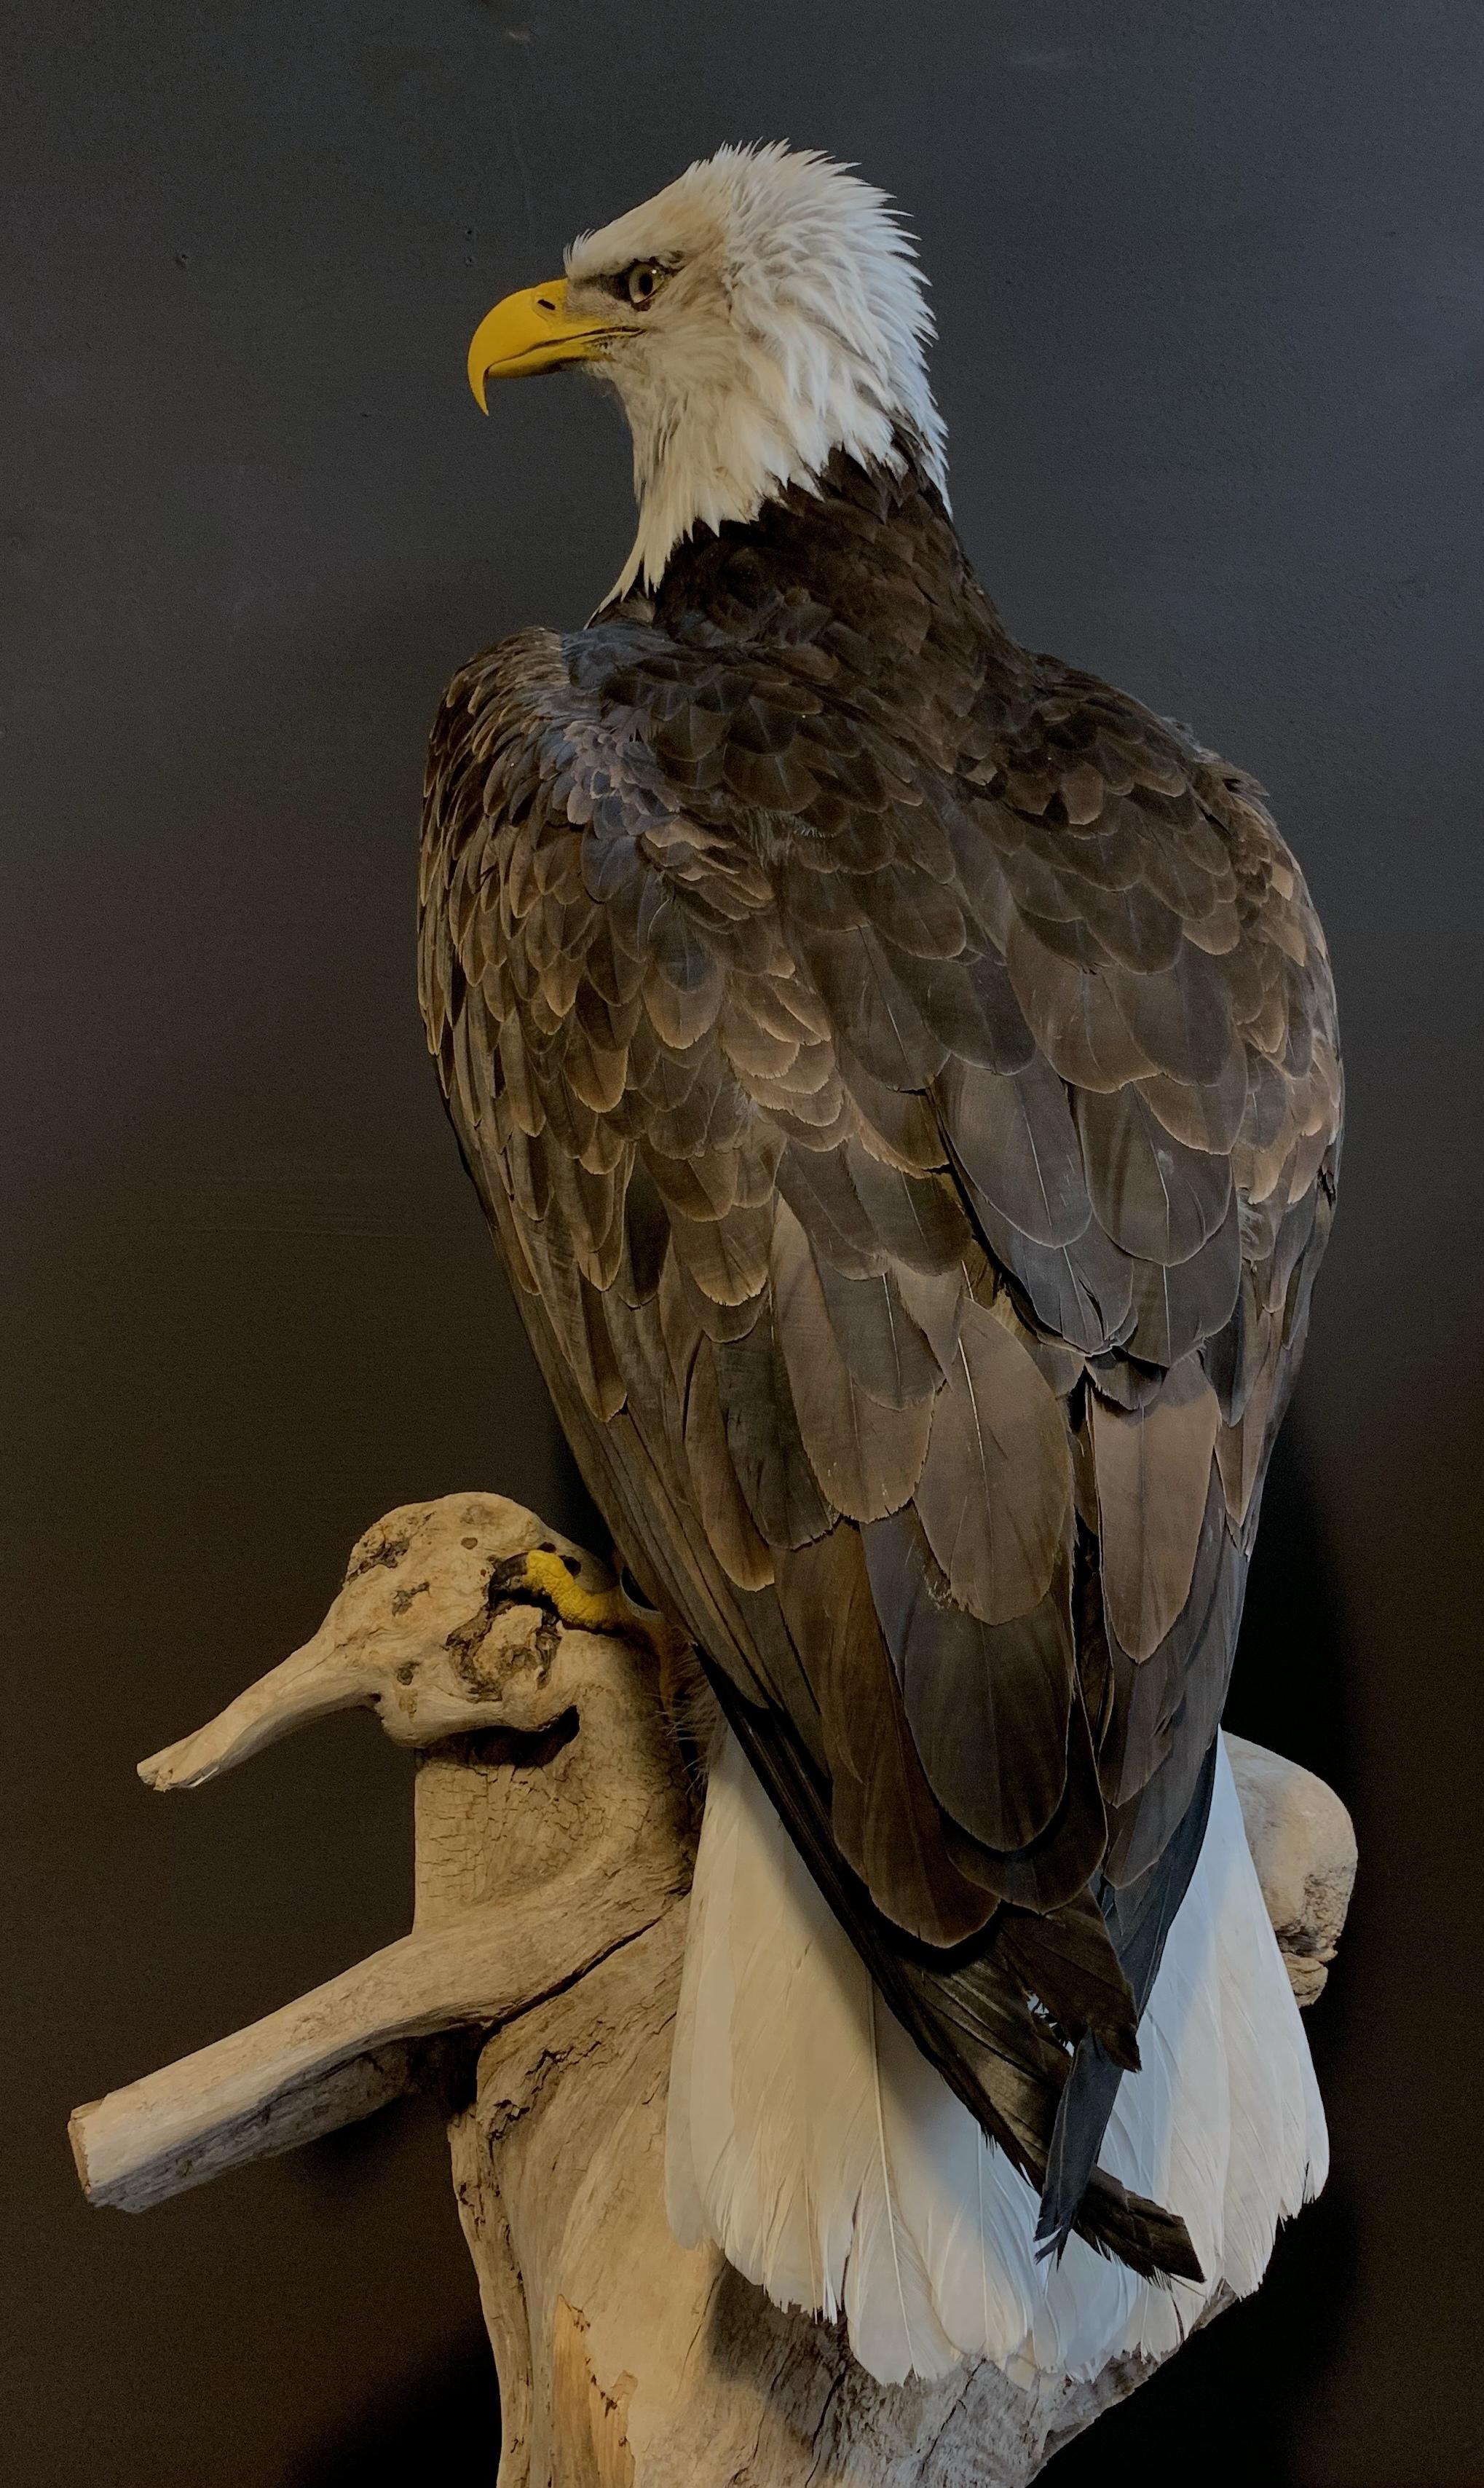 Recently stuffed American white-tailed eagle. The eagle is made very life-like and is a true masterpiece.
The bald eagle or white-headed bald eagle (Haliaeetus leucocephalus) is a bird of prey that breeds in Canada and in the United States. At the